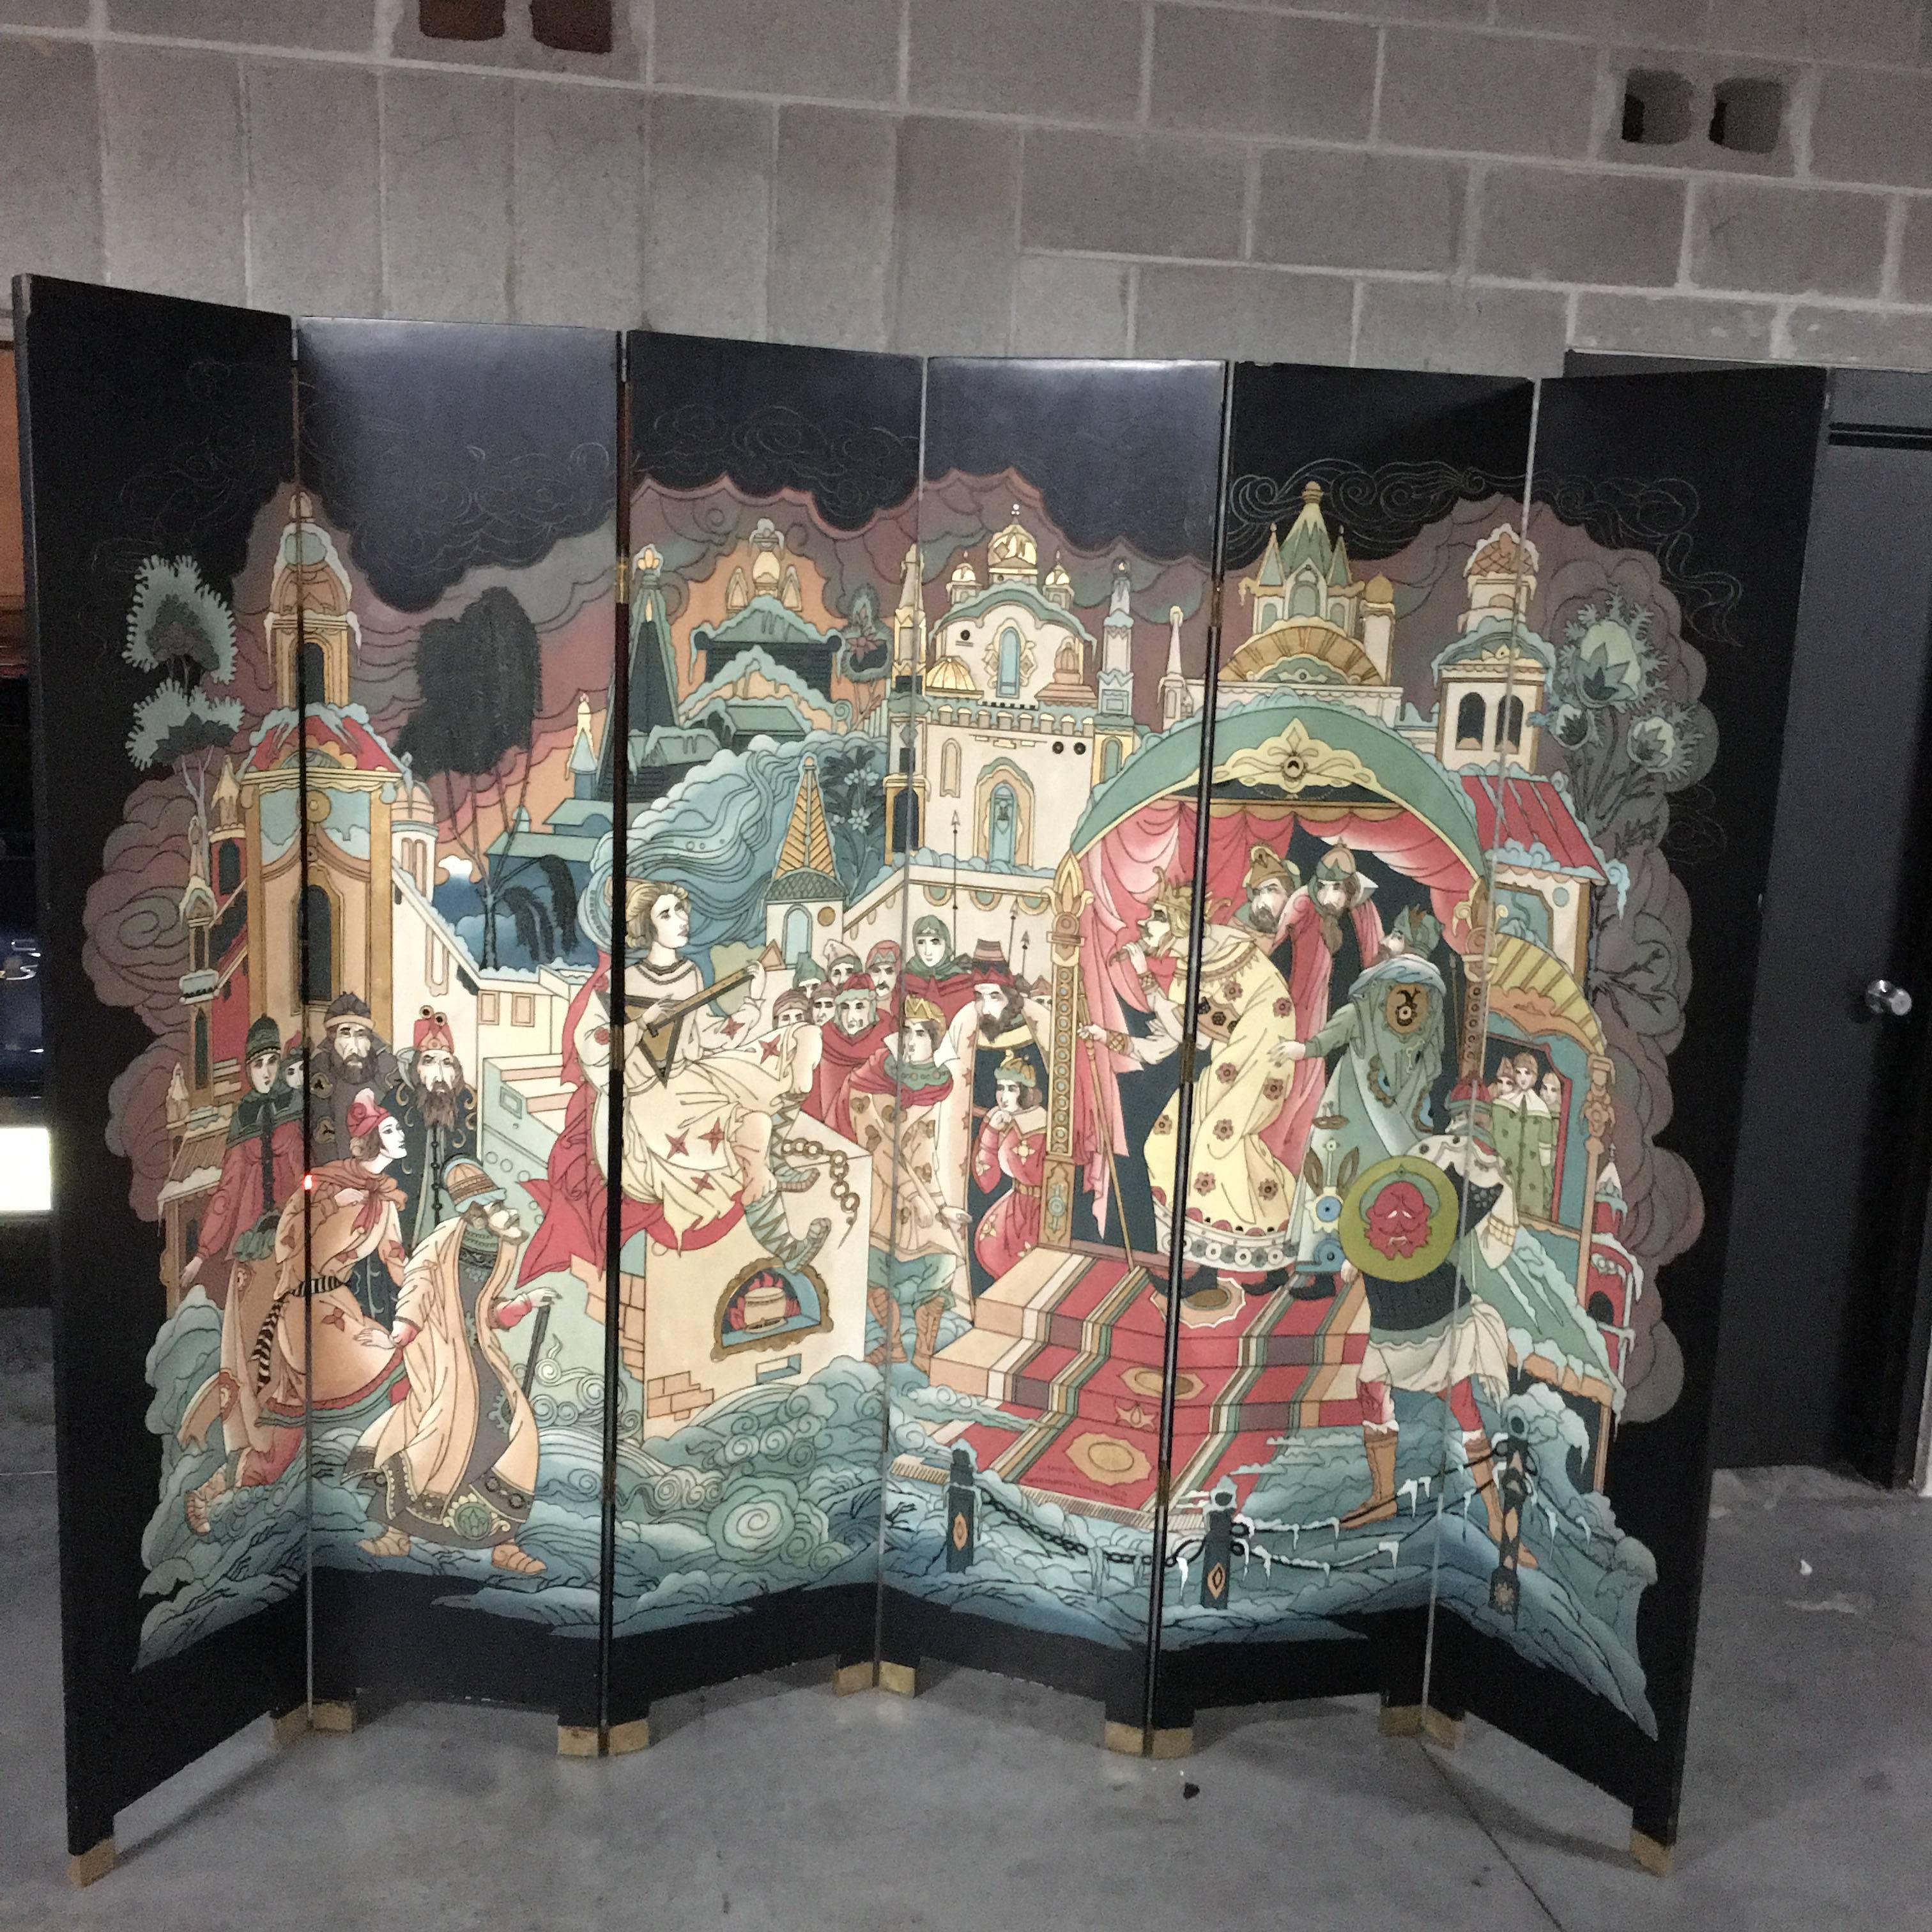 Terrific vintage decorative lacquered six-panel Chinese screen. This beautiful piece is comprised of black lacquered wood with colorful decorative hand-painted and guided designs. Brass feet adorn the bottom.